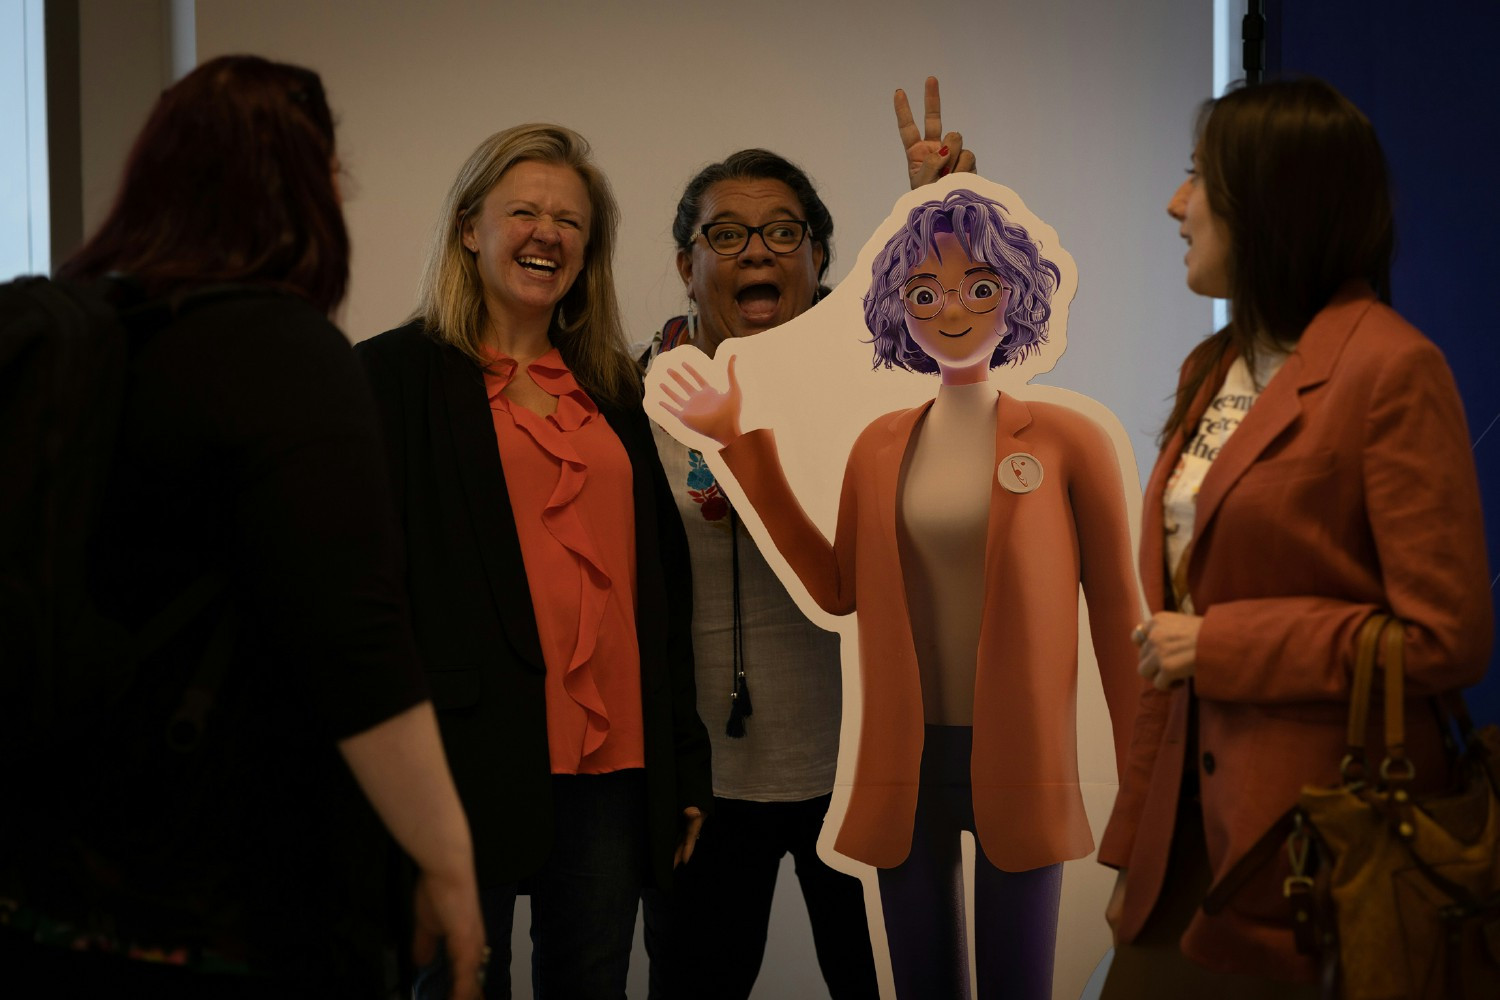 Our mascot, Flo alongside some amazing Florentians! You'll find several of Flo around the Atlanta HQ.